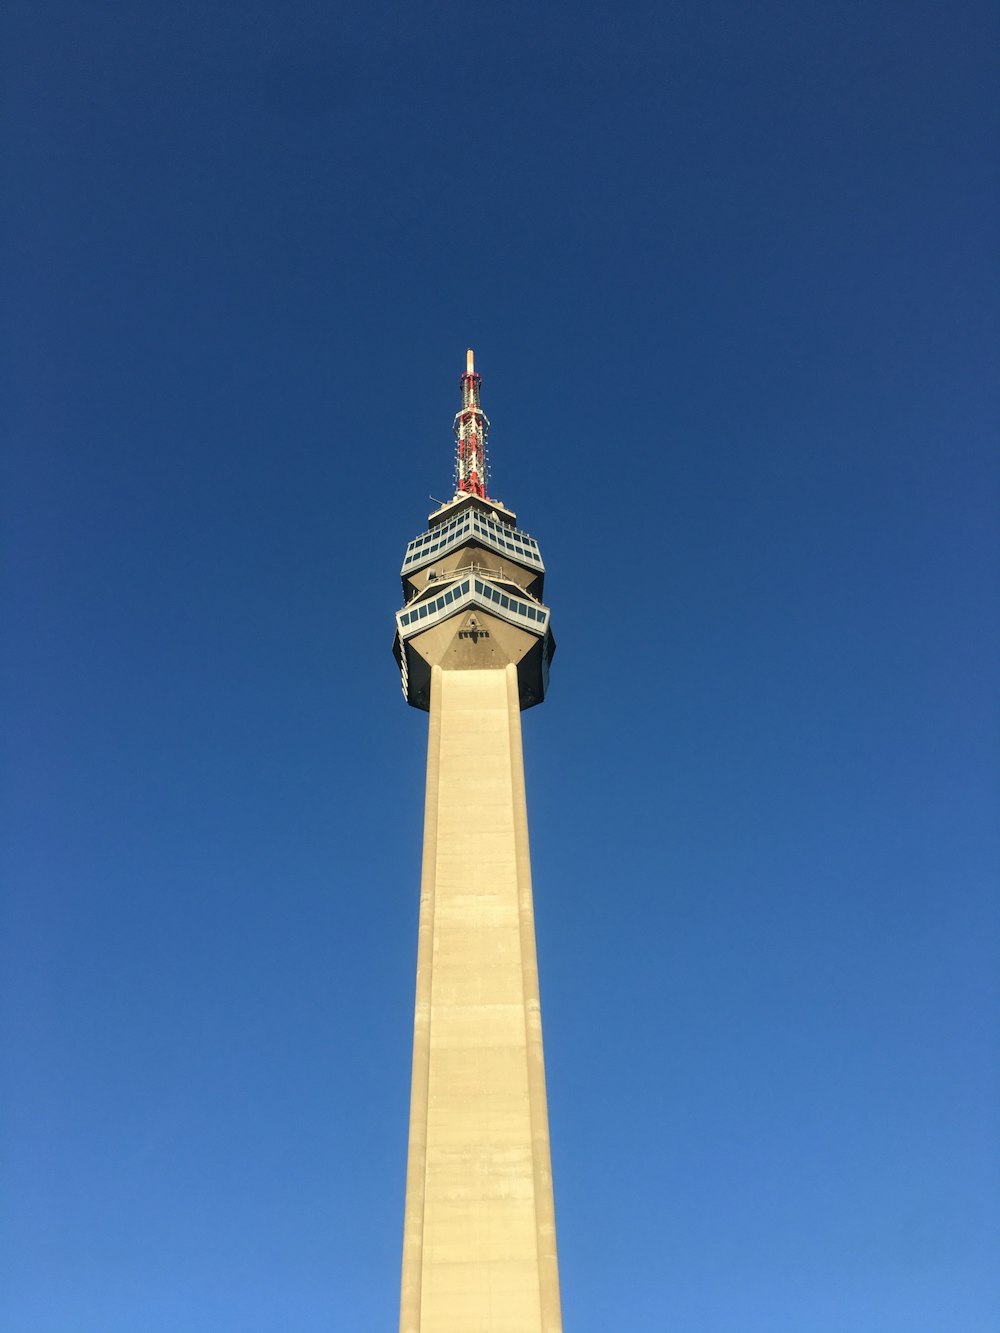 close-up photography of tower during daytime